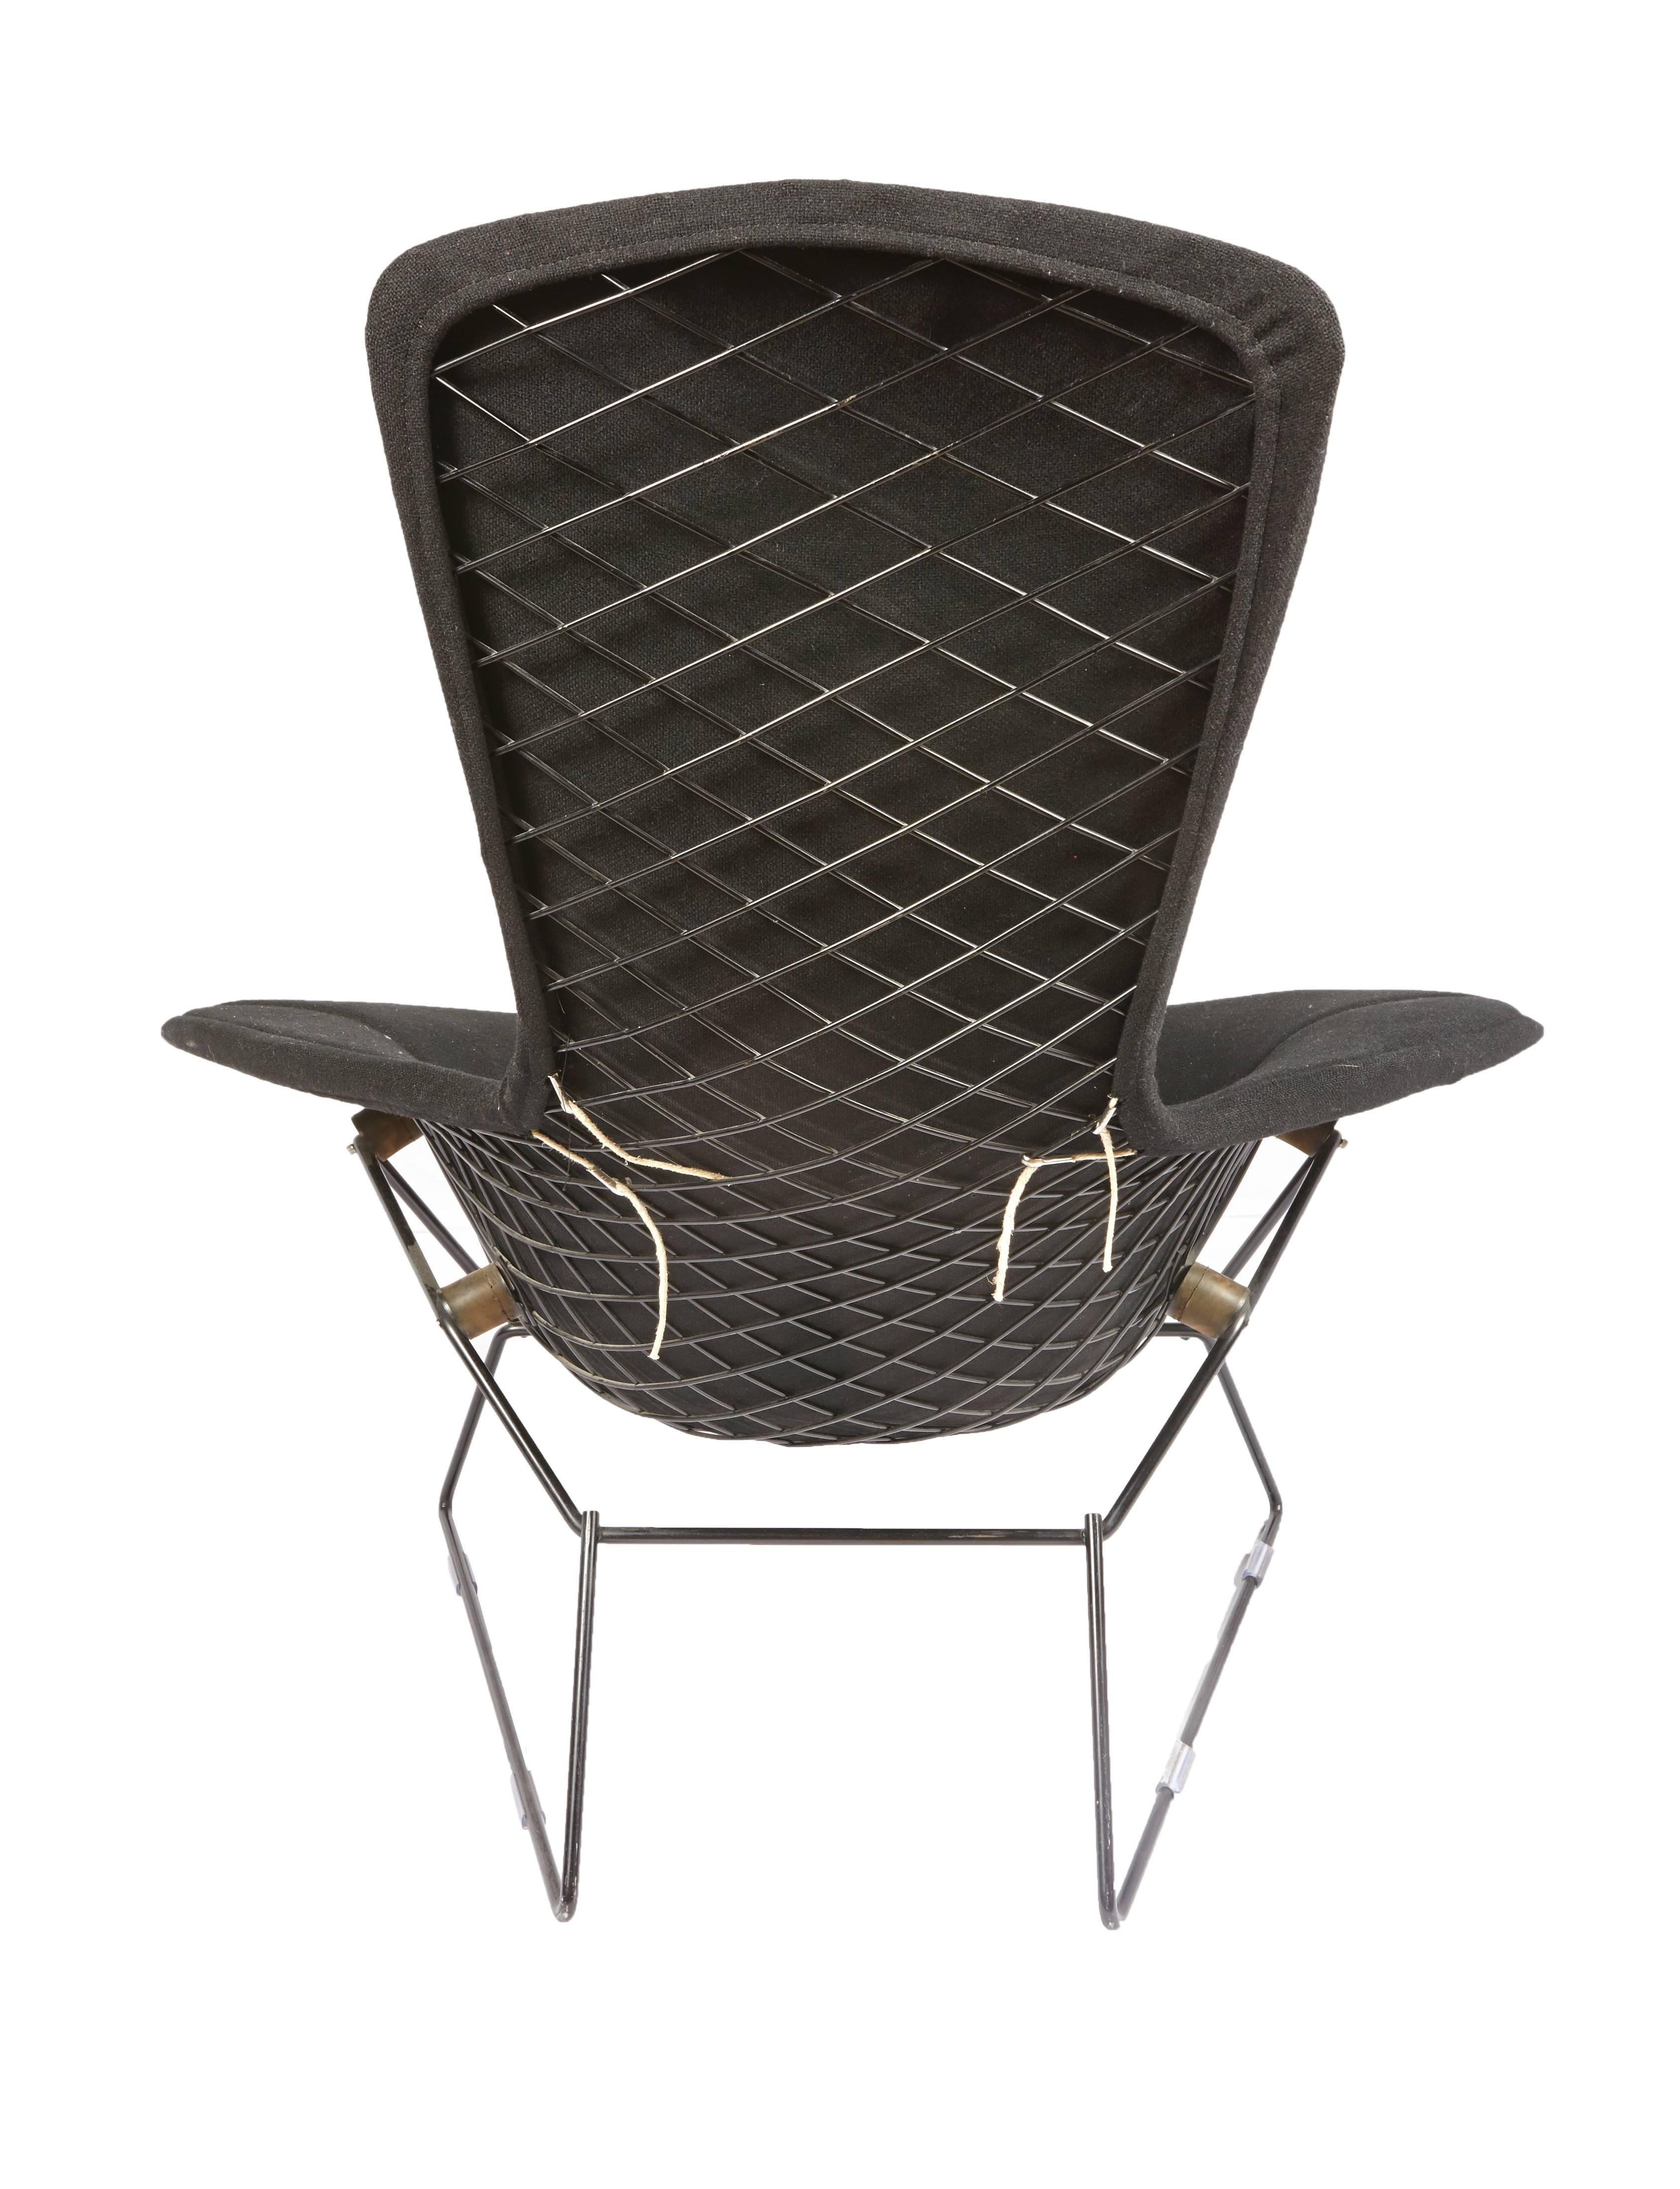 Vintage Bertoia bird chair and ottoman with full cover in Classic black bouclé for Knoll.
    